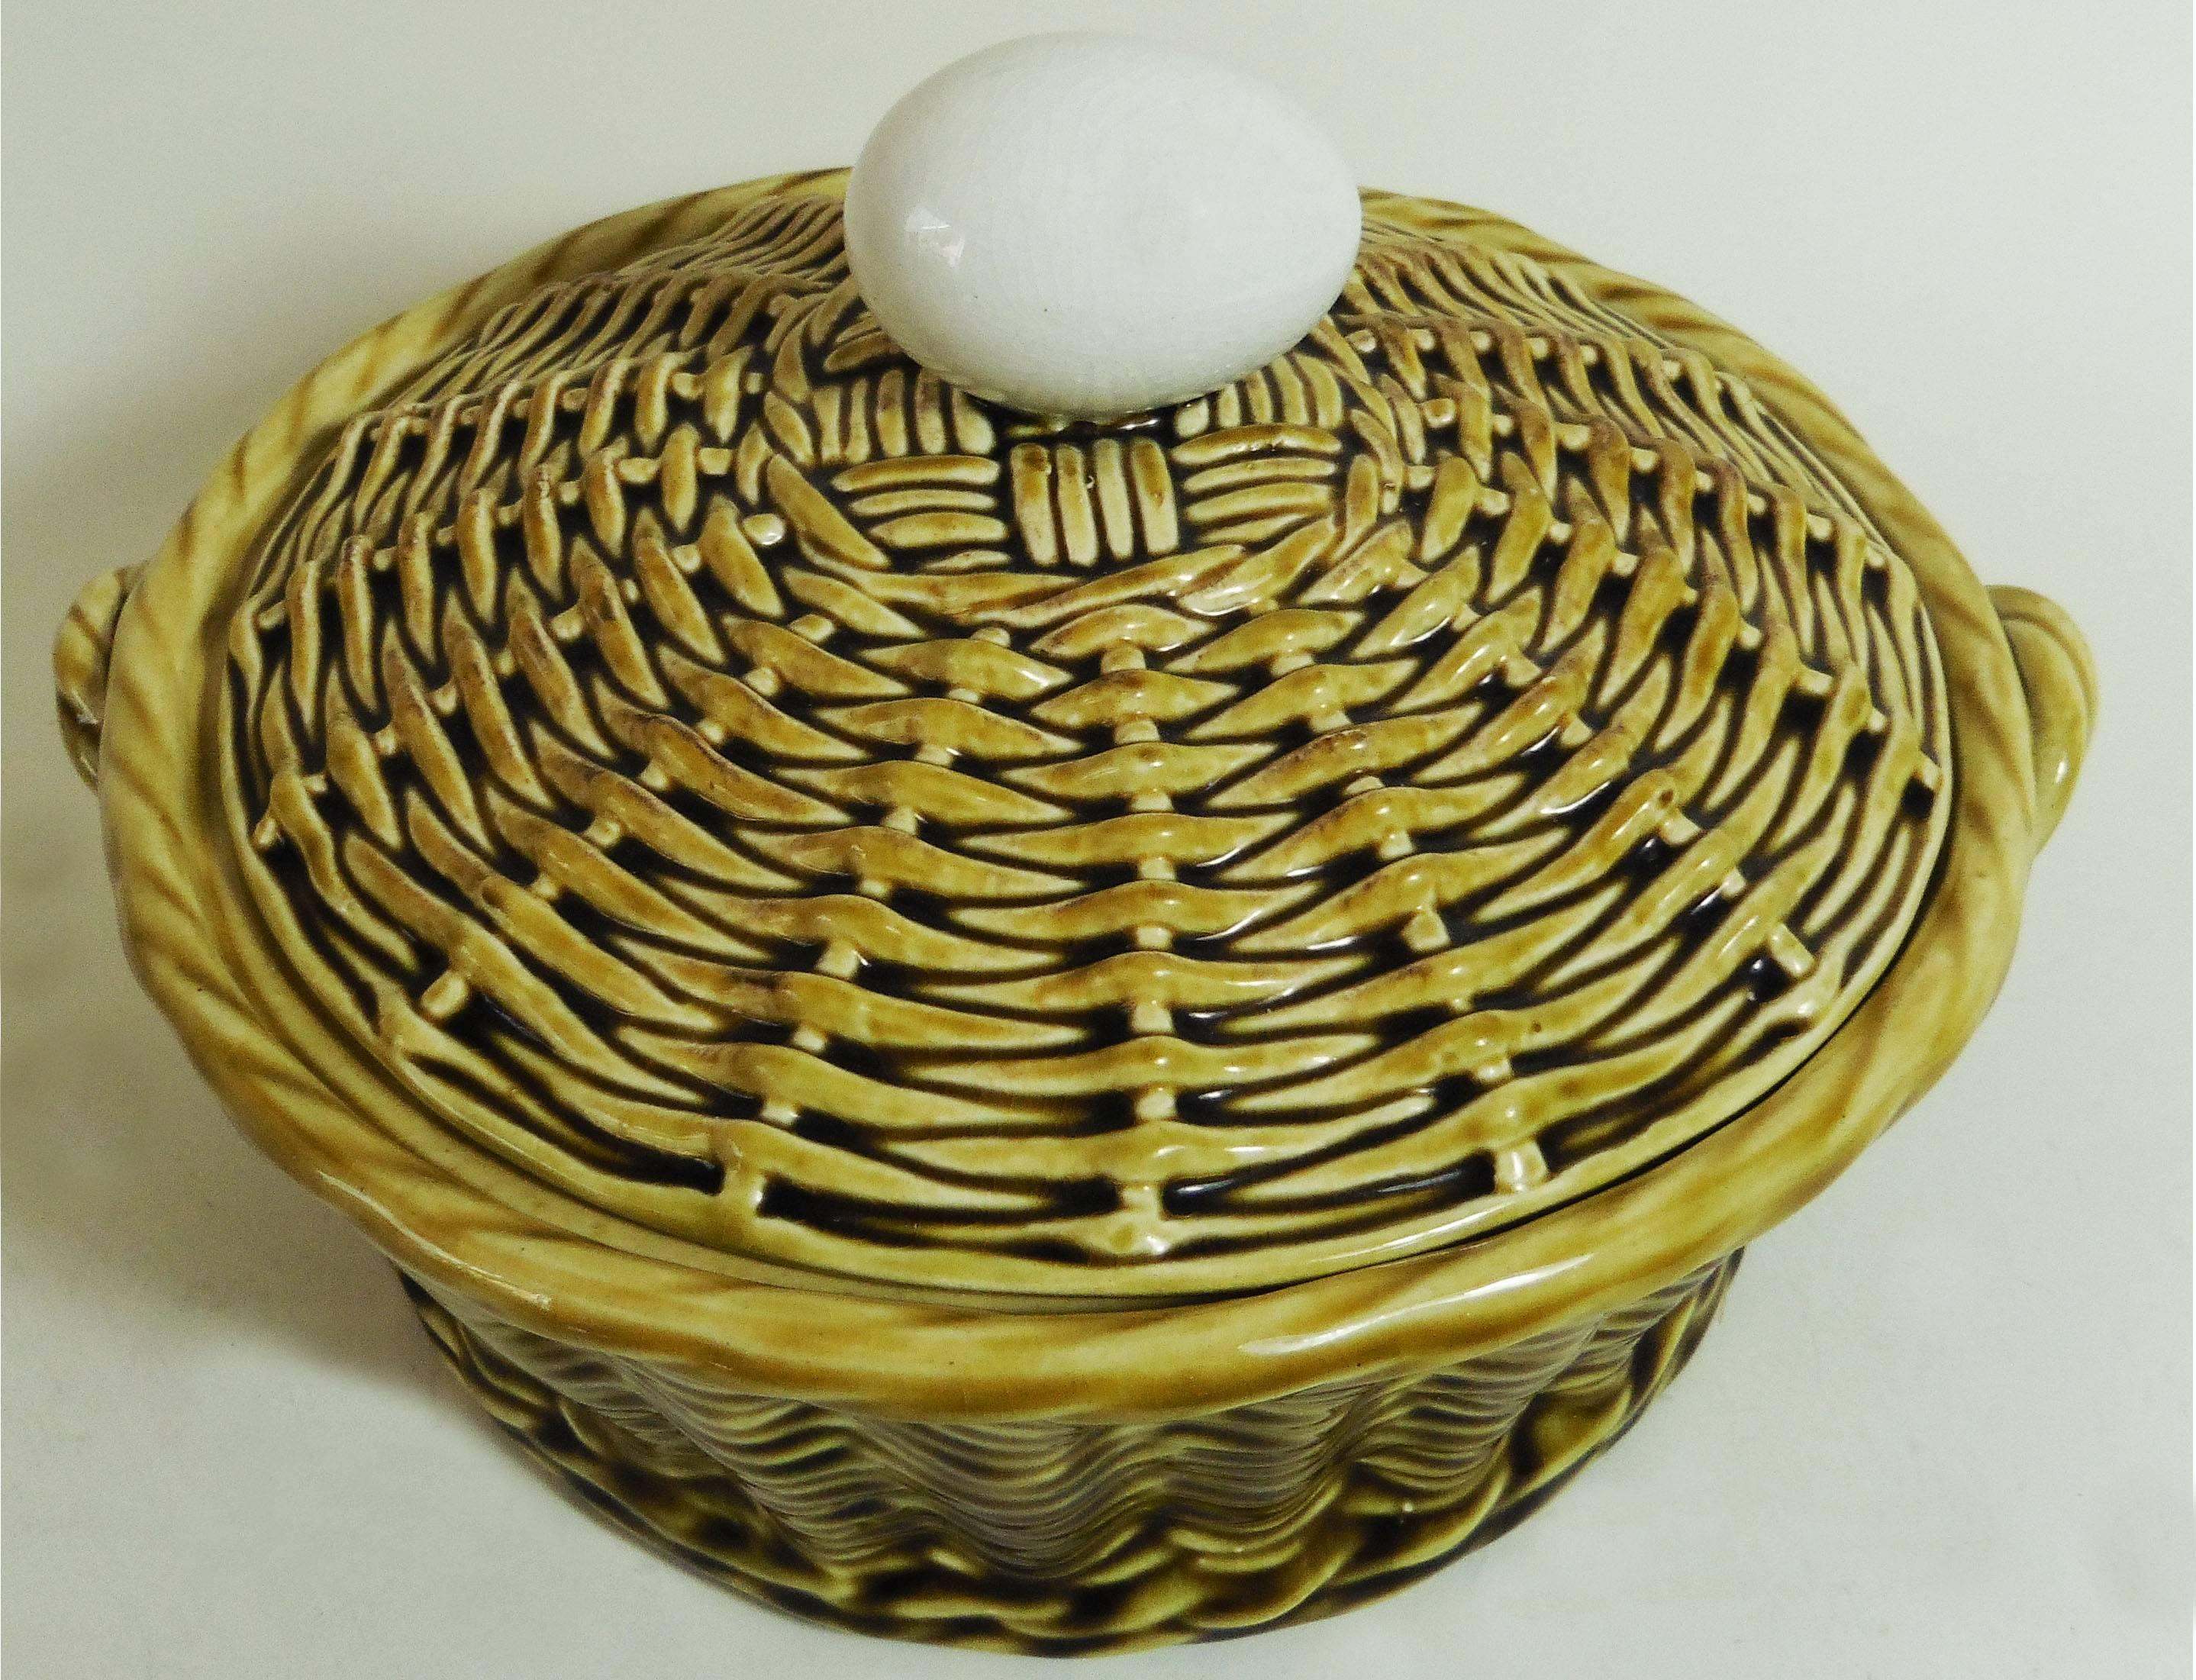 Majolica Trompe l'oeil basket with egg handle signed Sarreguemines, circa 1920.
This basket is the largest model, the piece exist in smaller size.